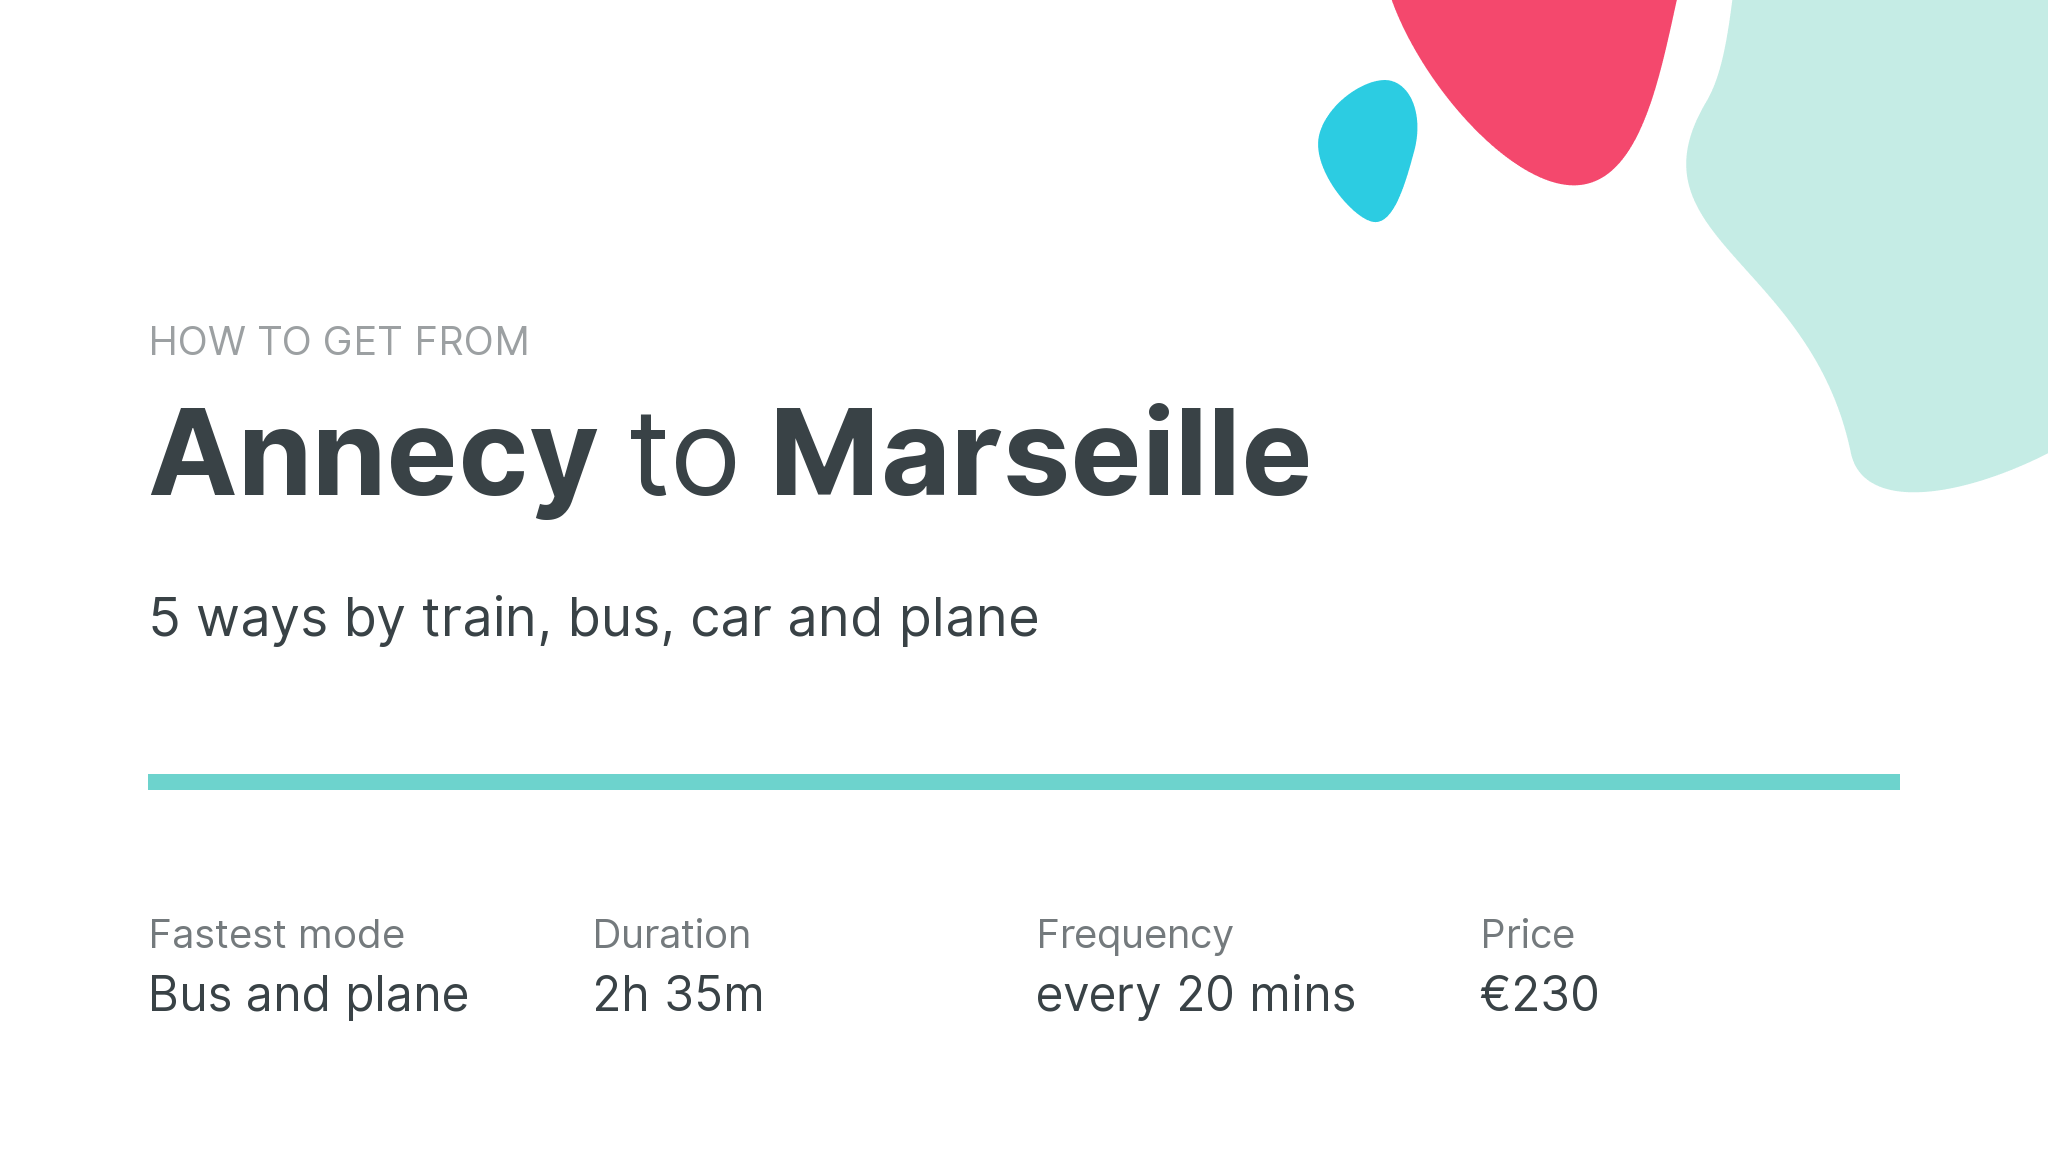 How do I get from Annecy to Marseille